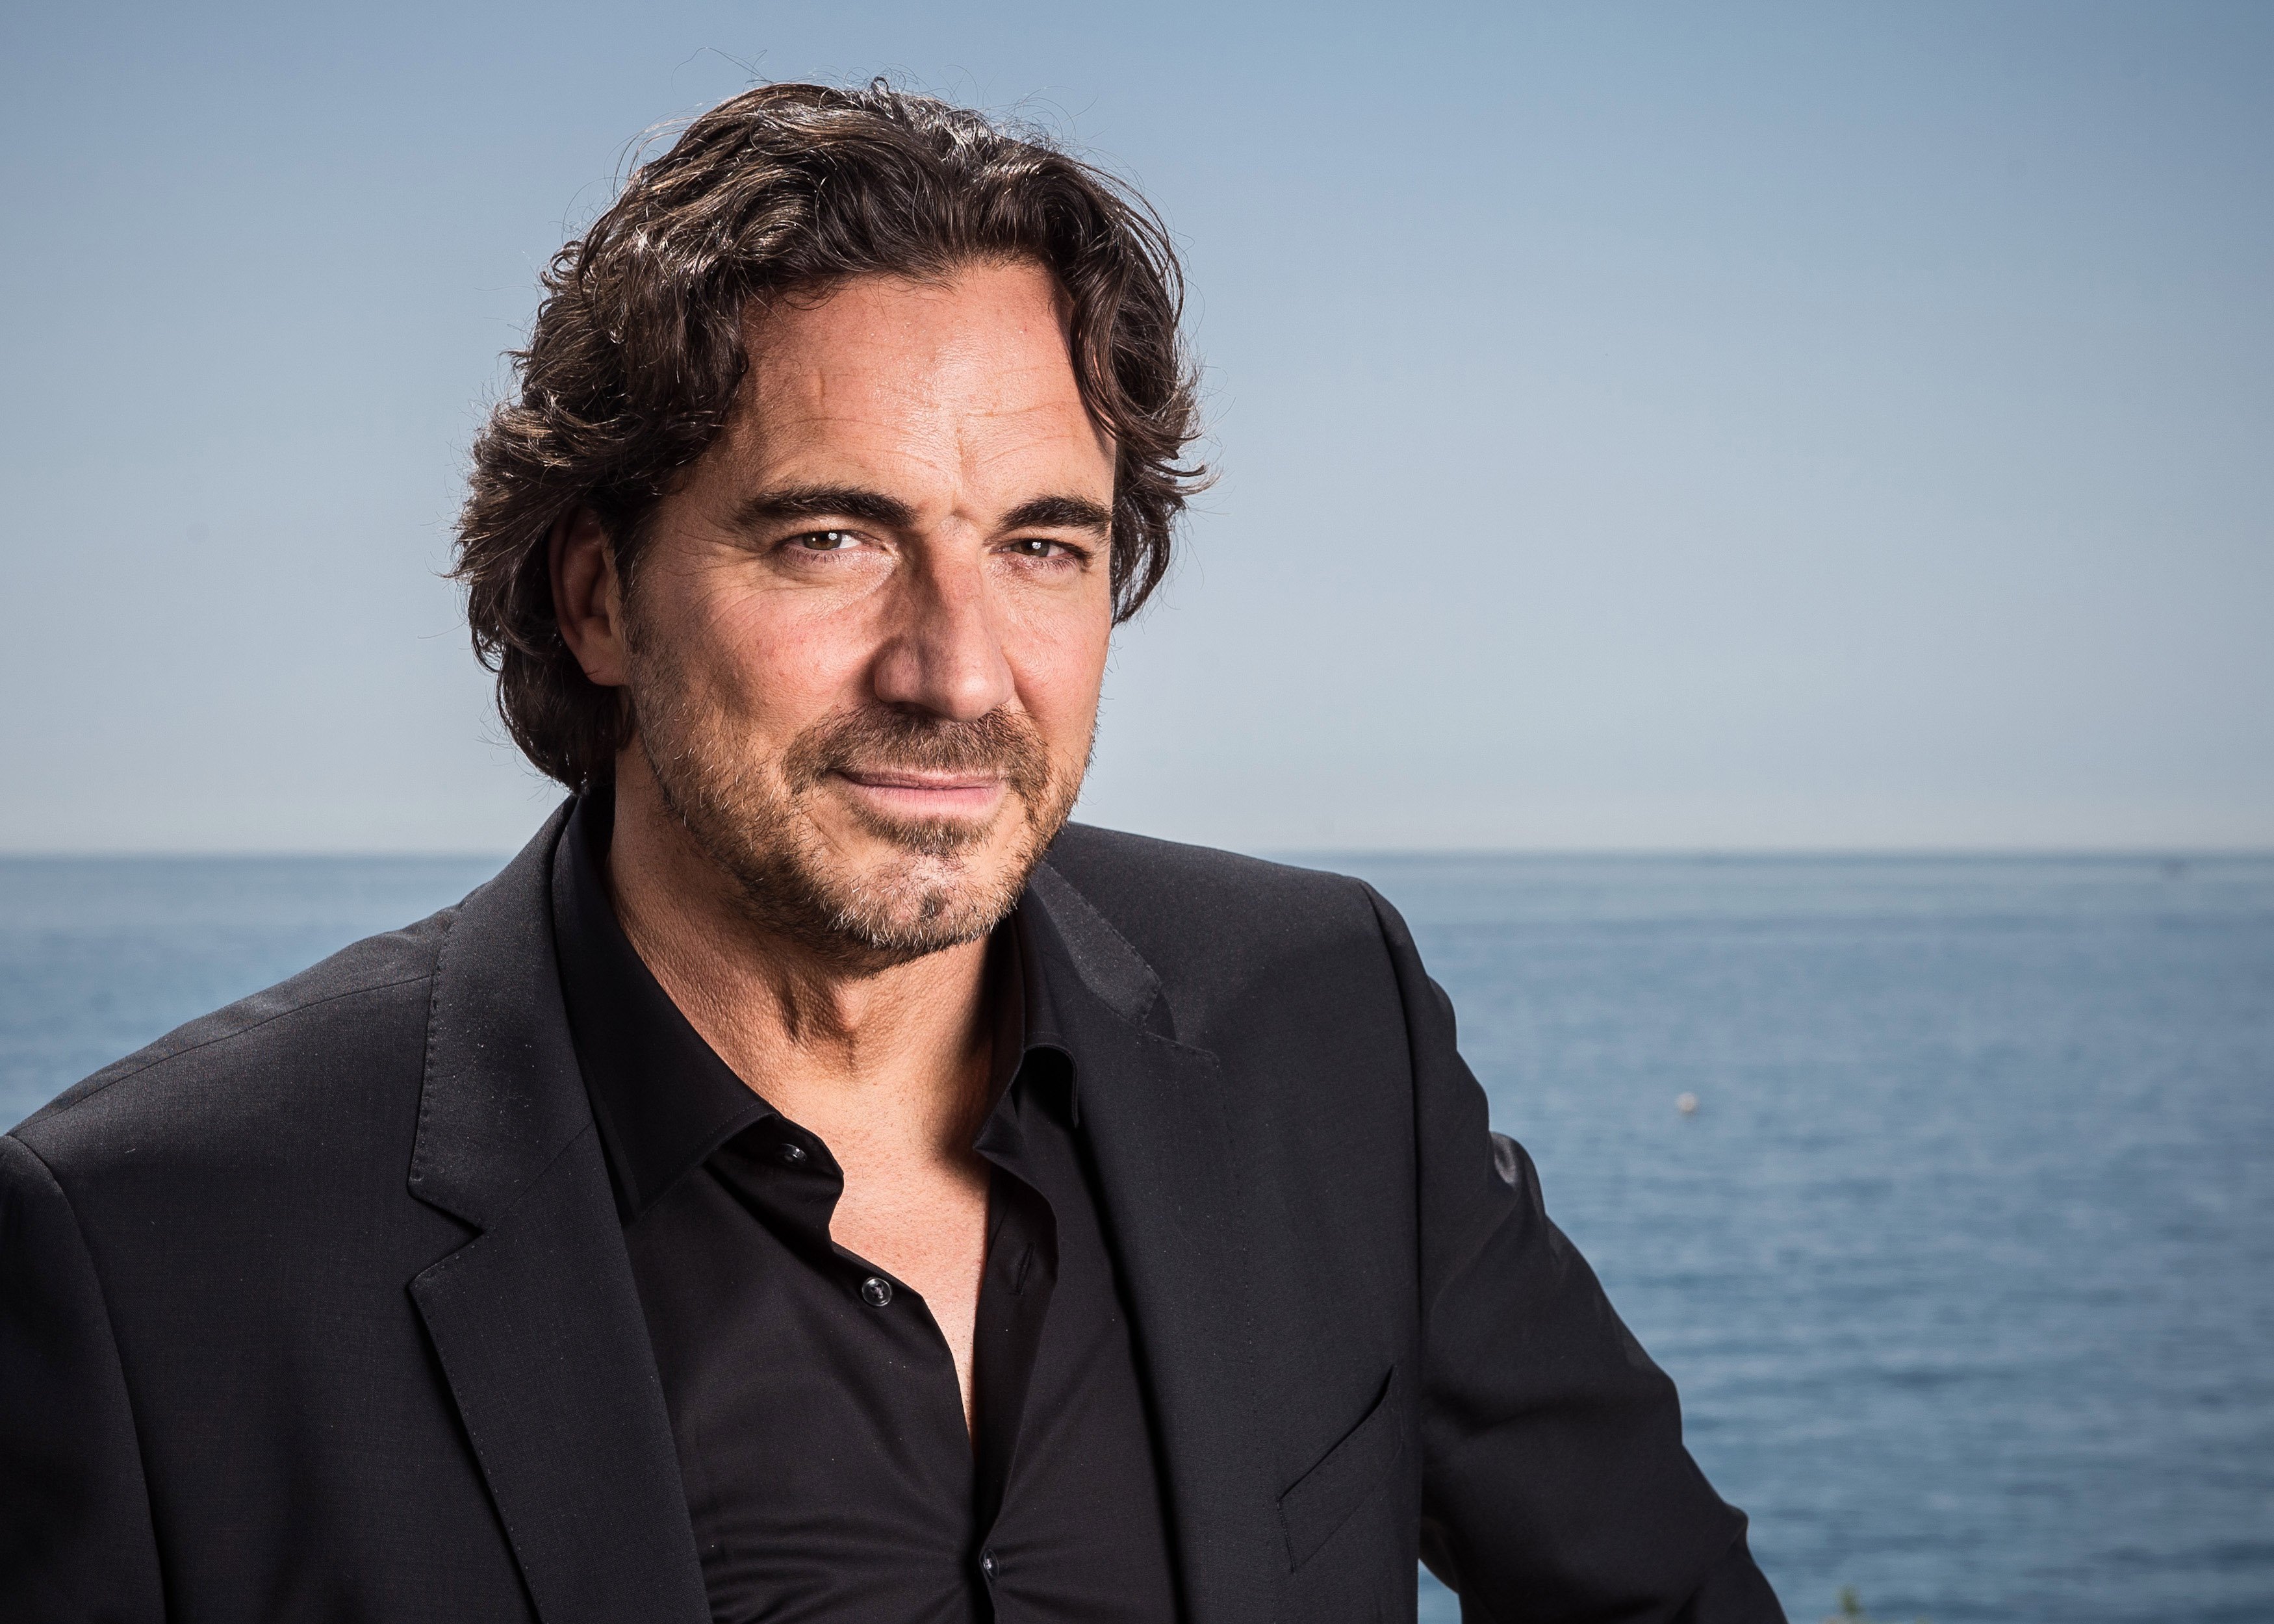 'The Bold and the Beautiful' star Thorsten Kaye in a black suit and poses in front of the sea.